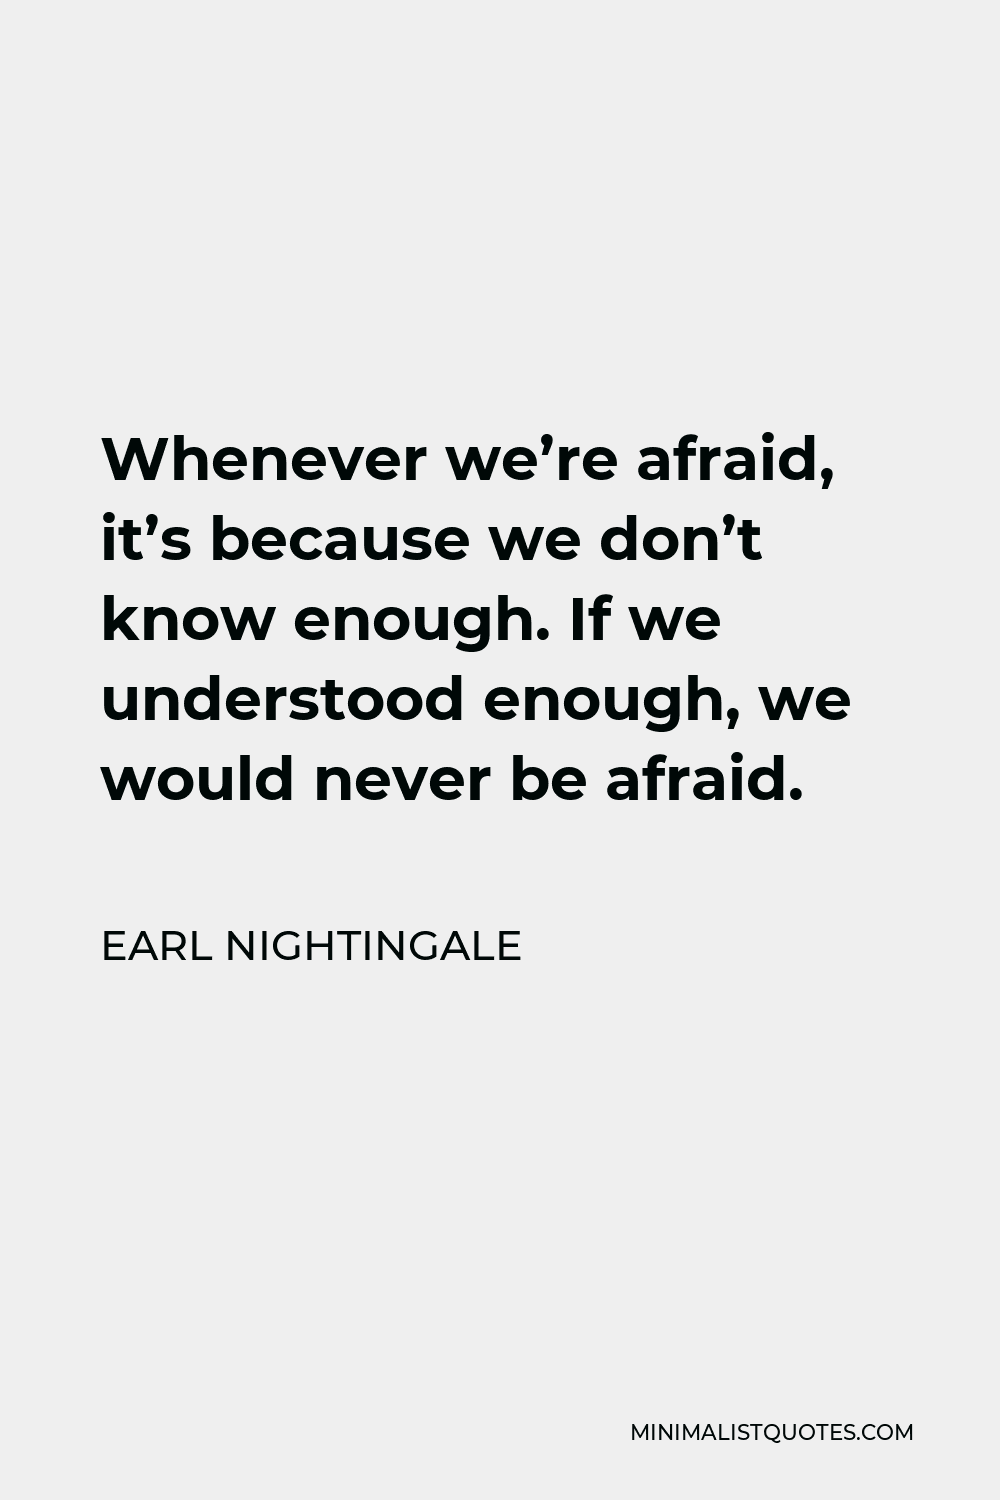 Earl Nightingale Quote - Whenever we’re afraid, it’s because we don’t know enough. If we understood enough, we would never be afraid.